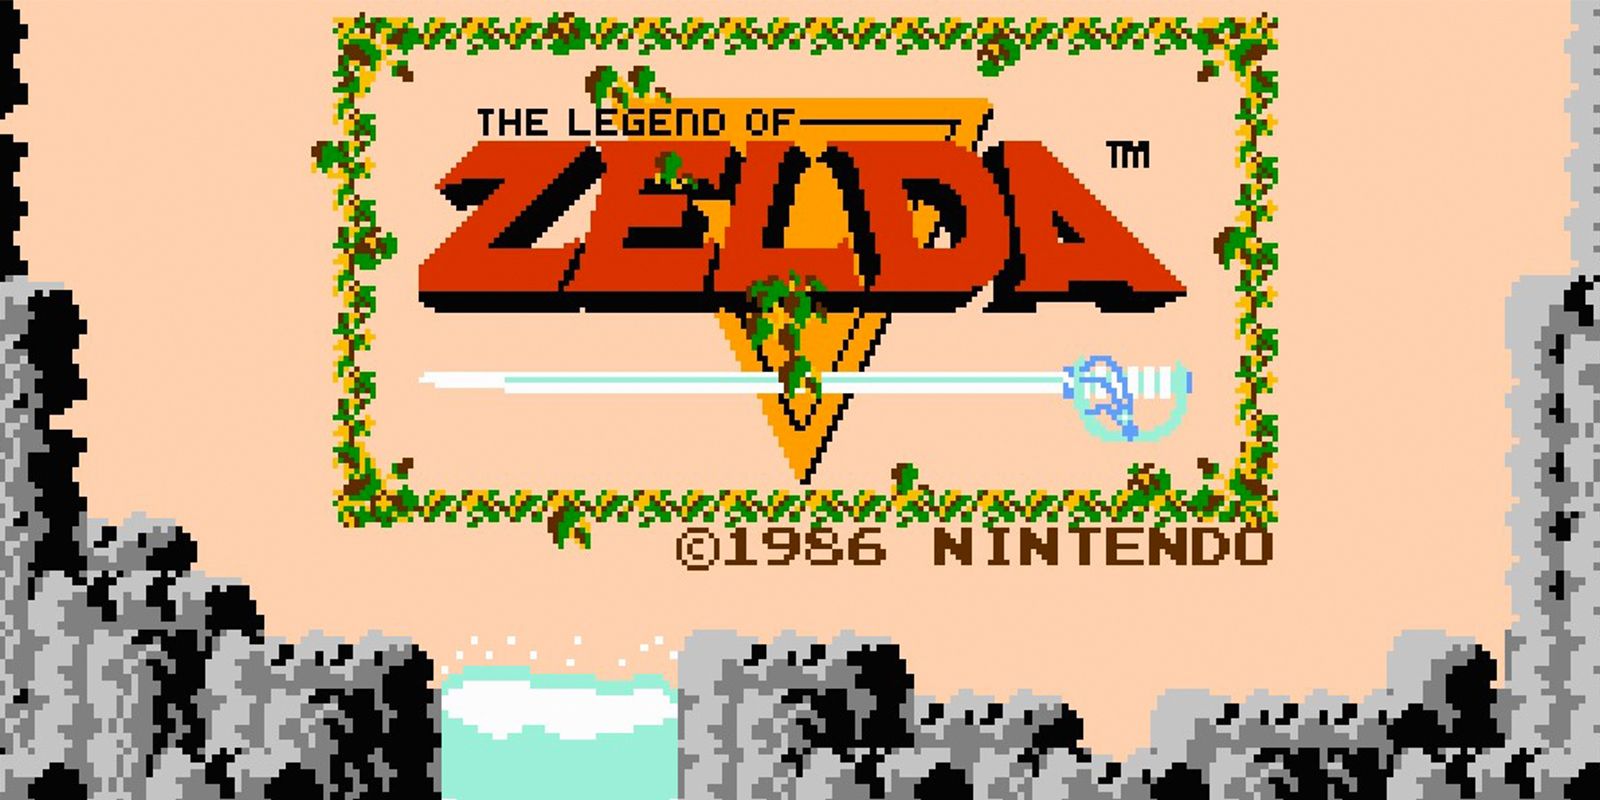 The title screen from the original Zelda game.